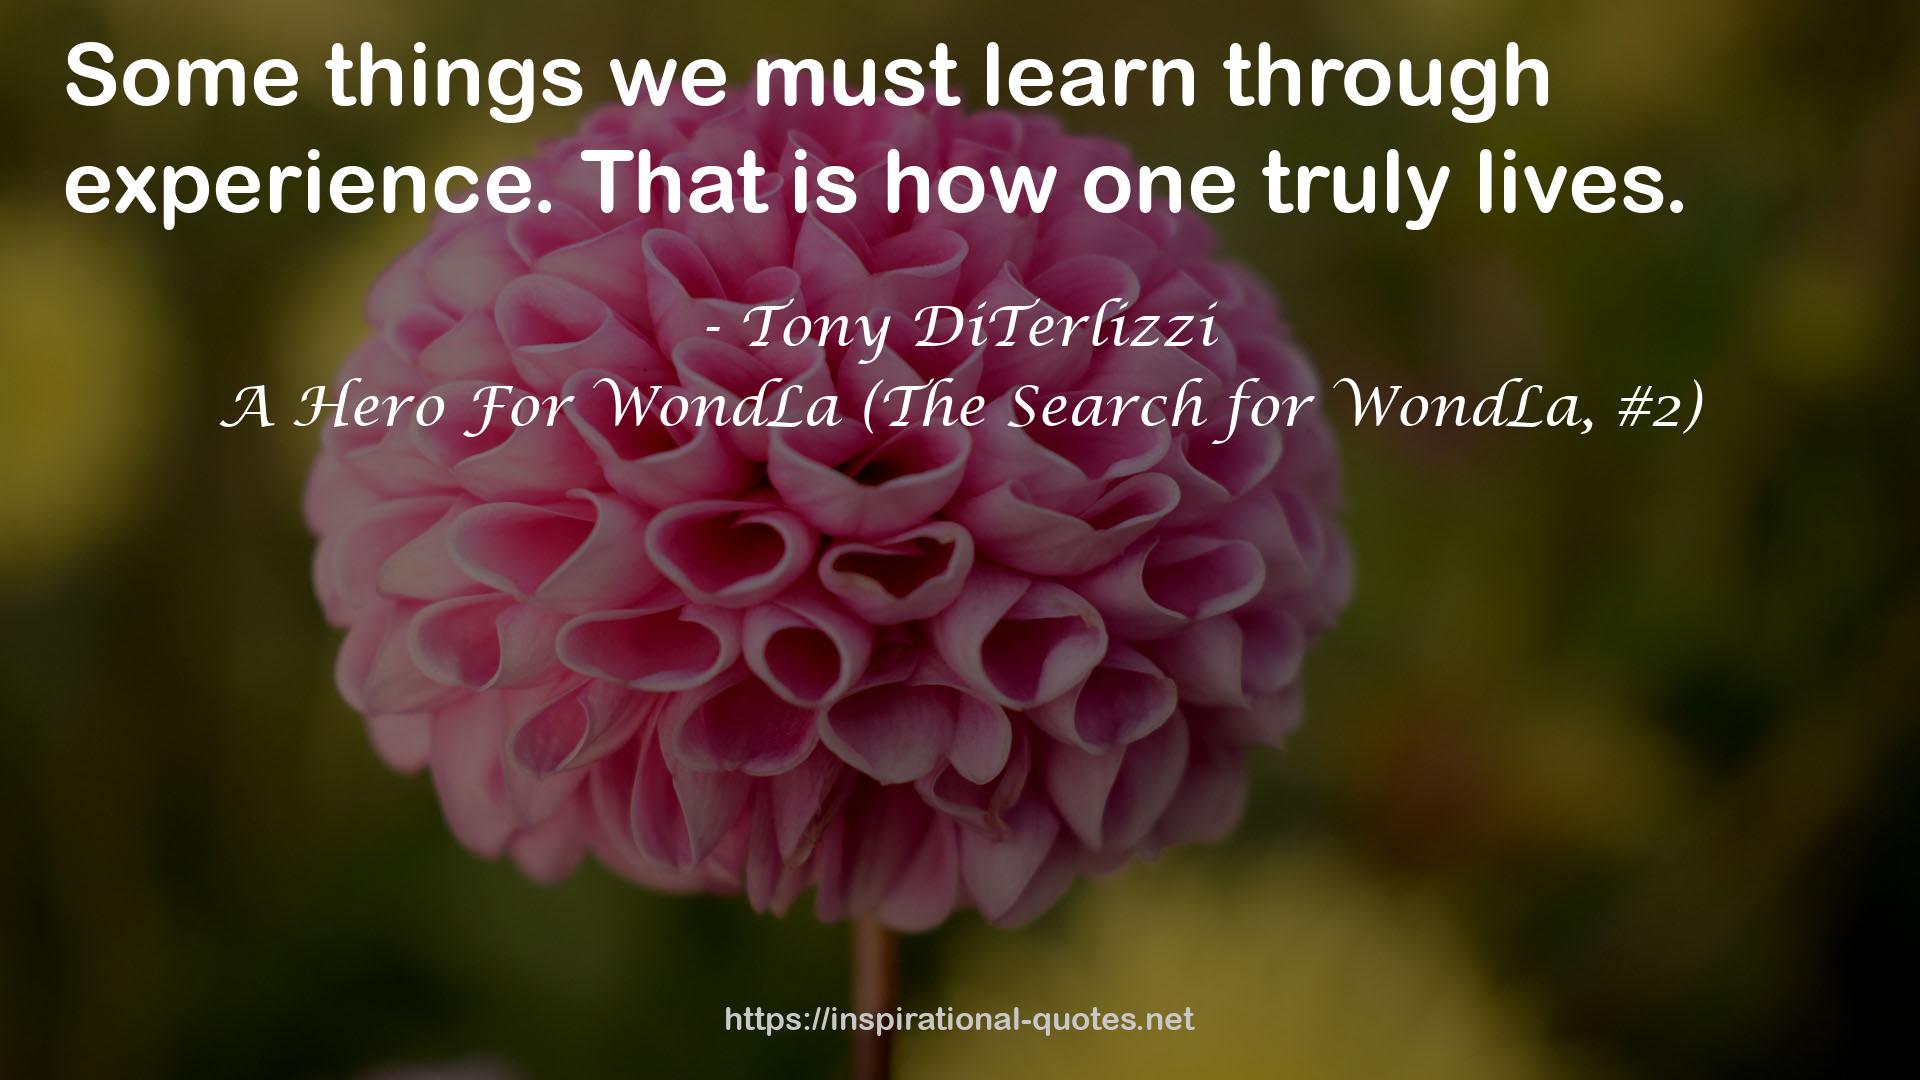 A Hero For WondLa (The Search for WondLa, #2) QUOTES